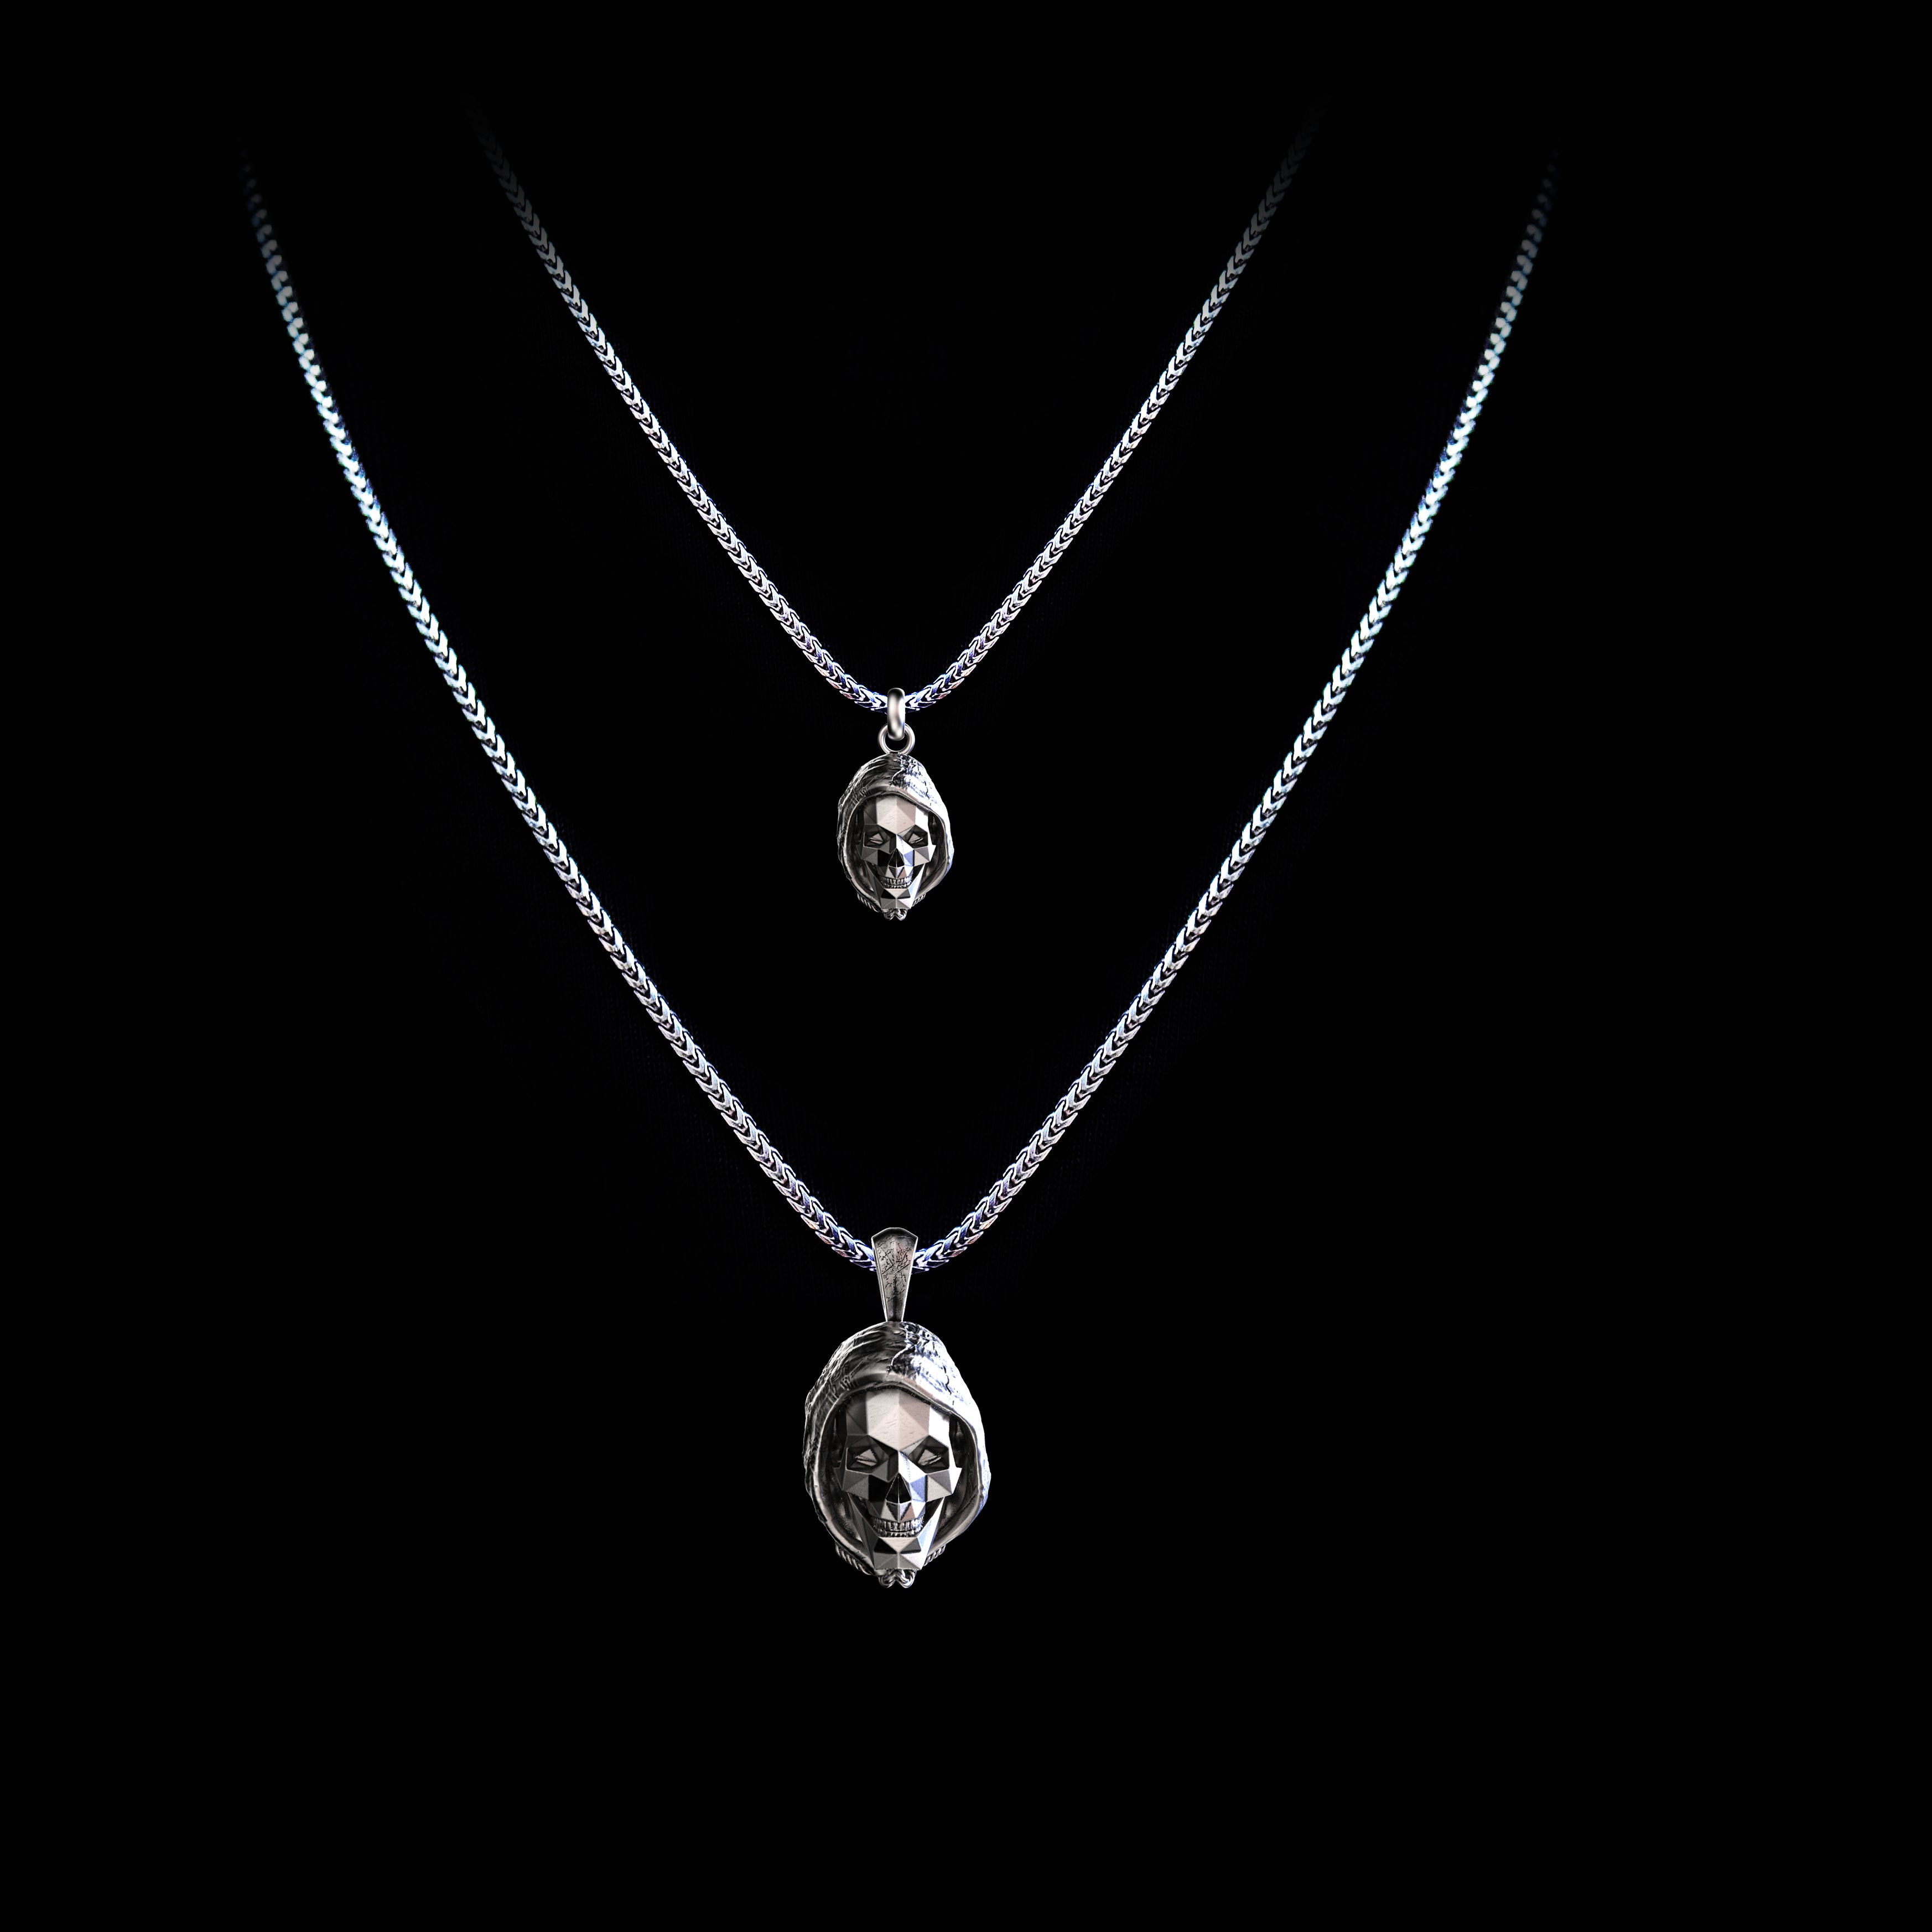 Reaper Necklace